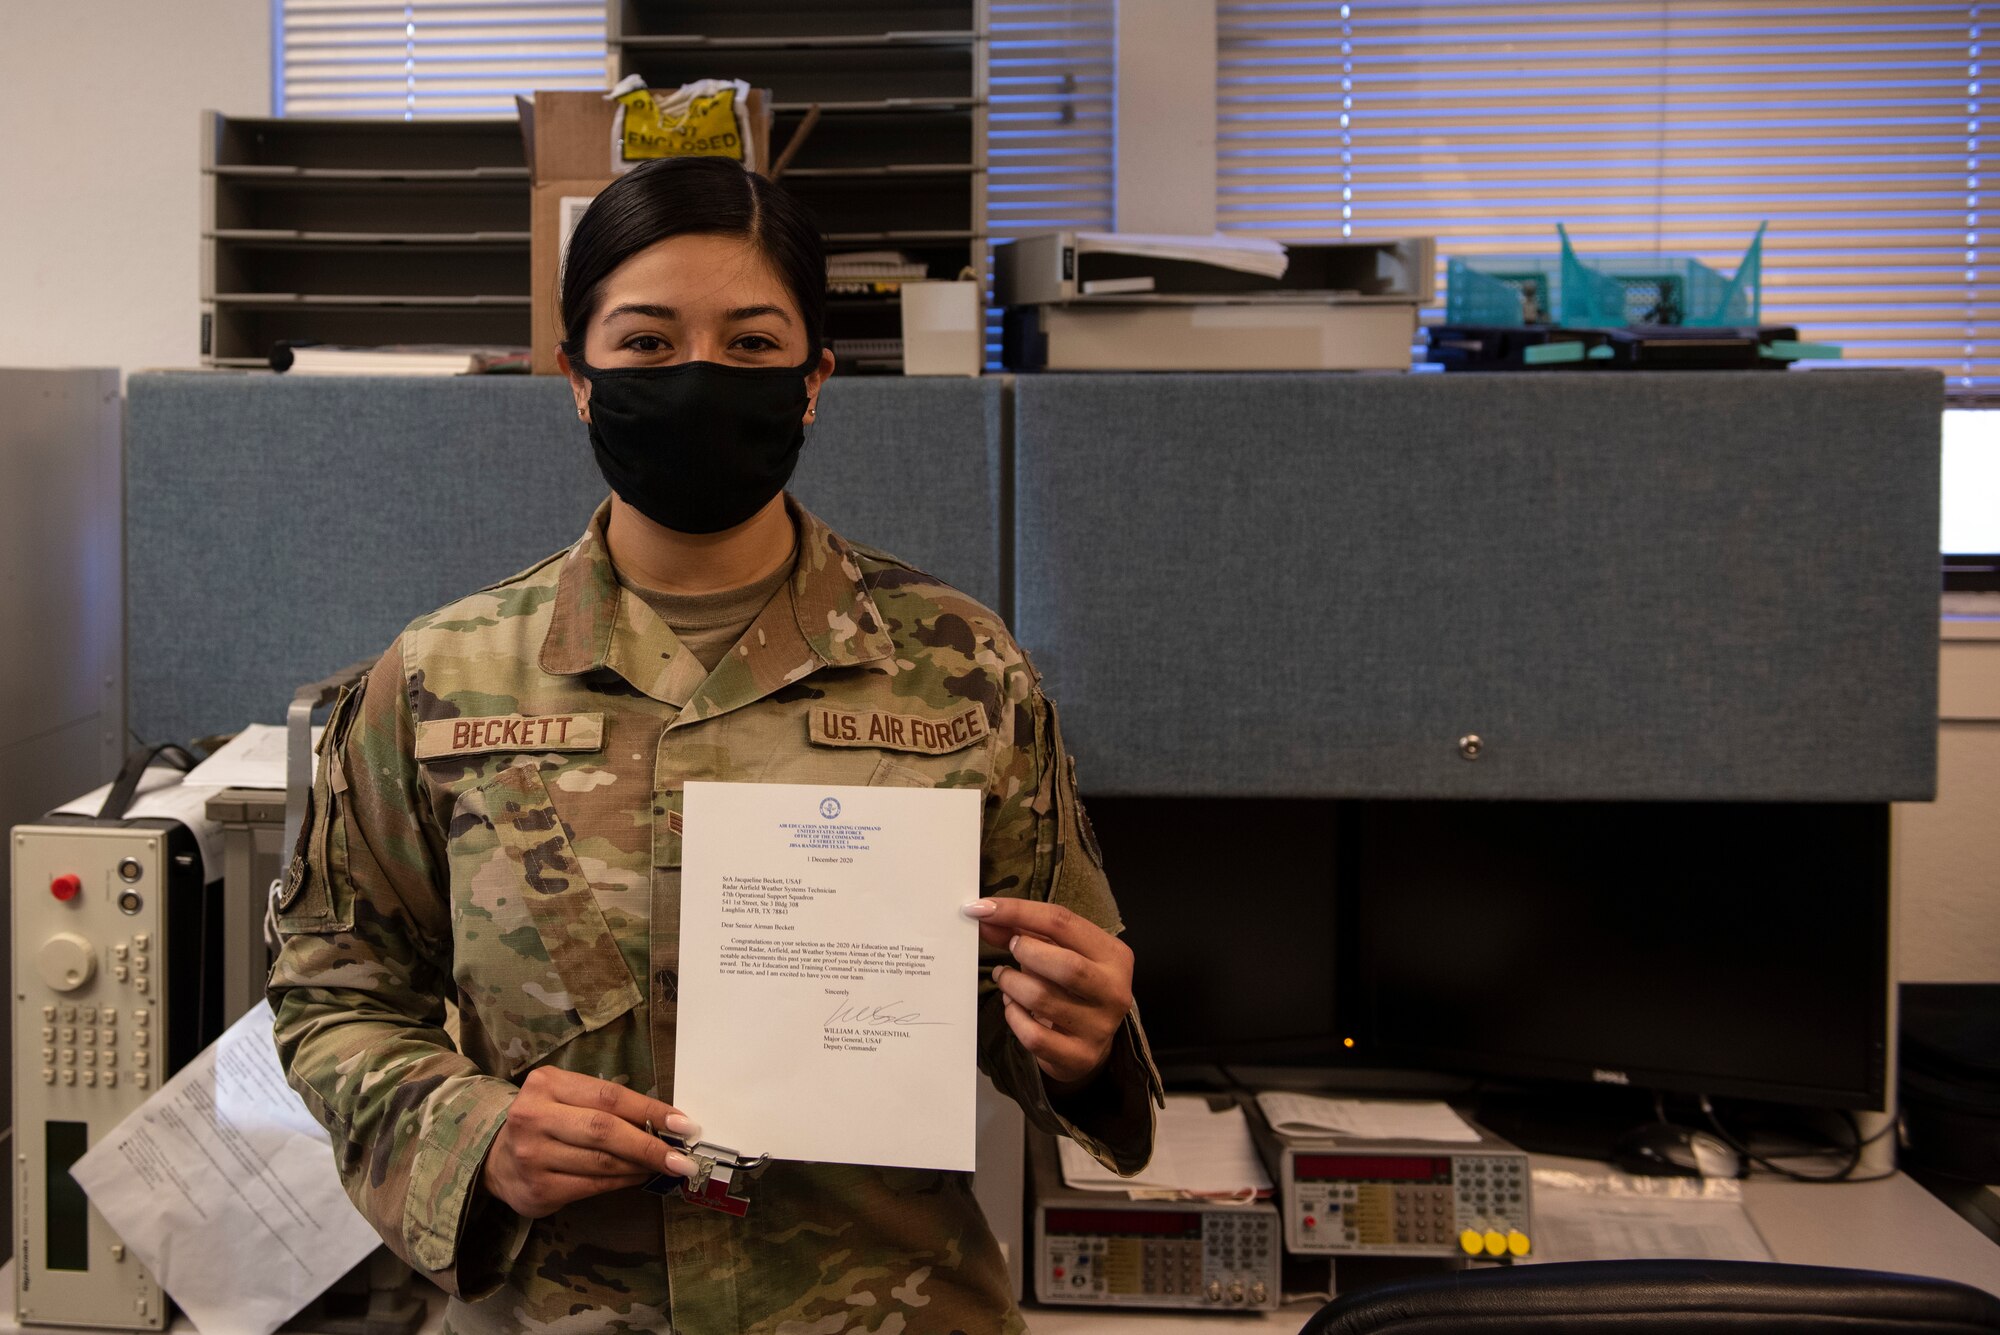 Senior Airman Jacqueline Beckett, 47th Operations Support Squadron radar airfield weather systems electronic technician, holds her letter of acknowledgement of being named Airman of the year in her career field in Air Education and Training Command, Jan. 7, 2021, at Laughlin Air Force Base, Texas. She is an Airman that always demonstrates the core values of the Air Force at all times. (U.S. Air Force photo by Airman 1st Class David Phaff)